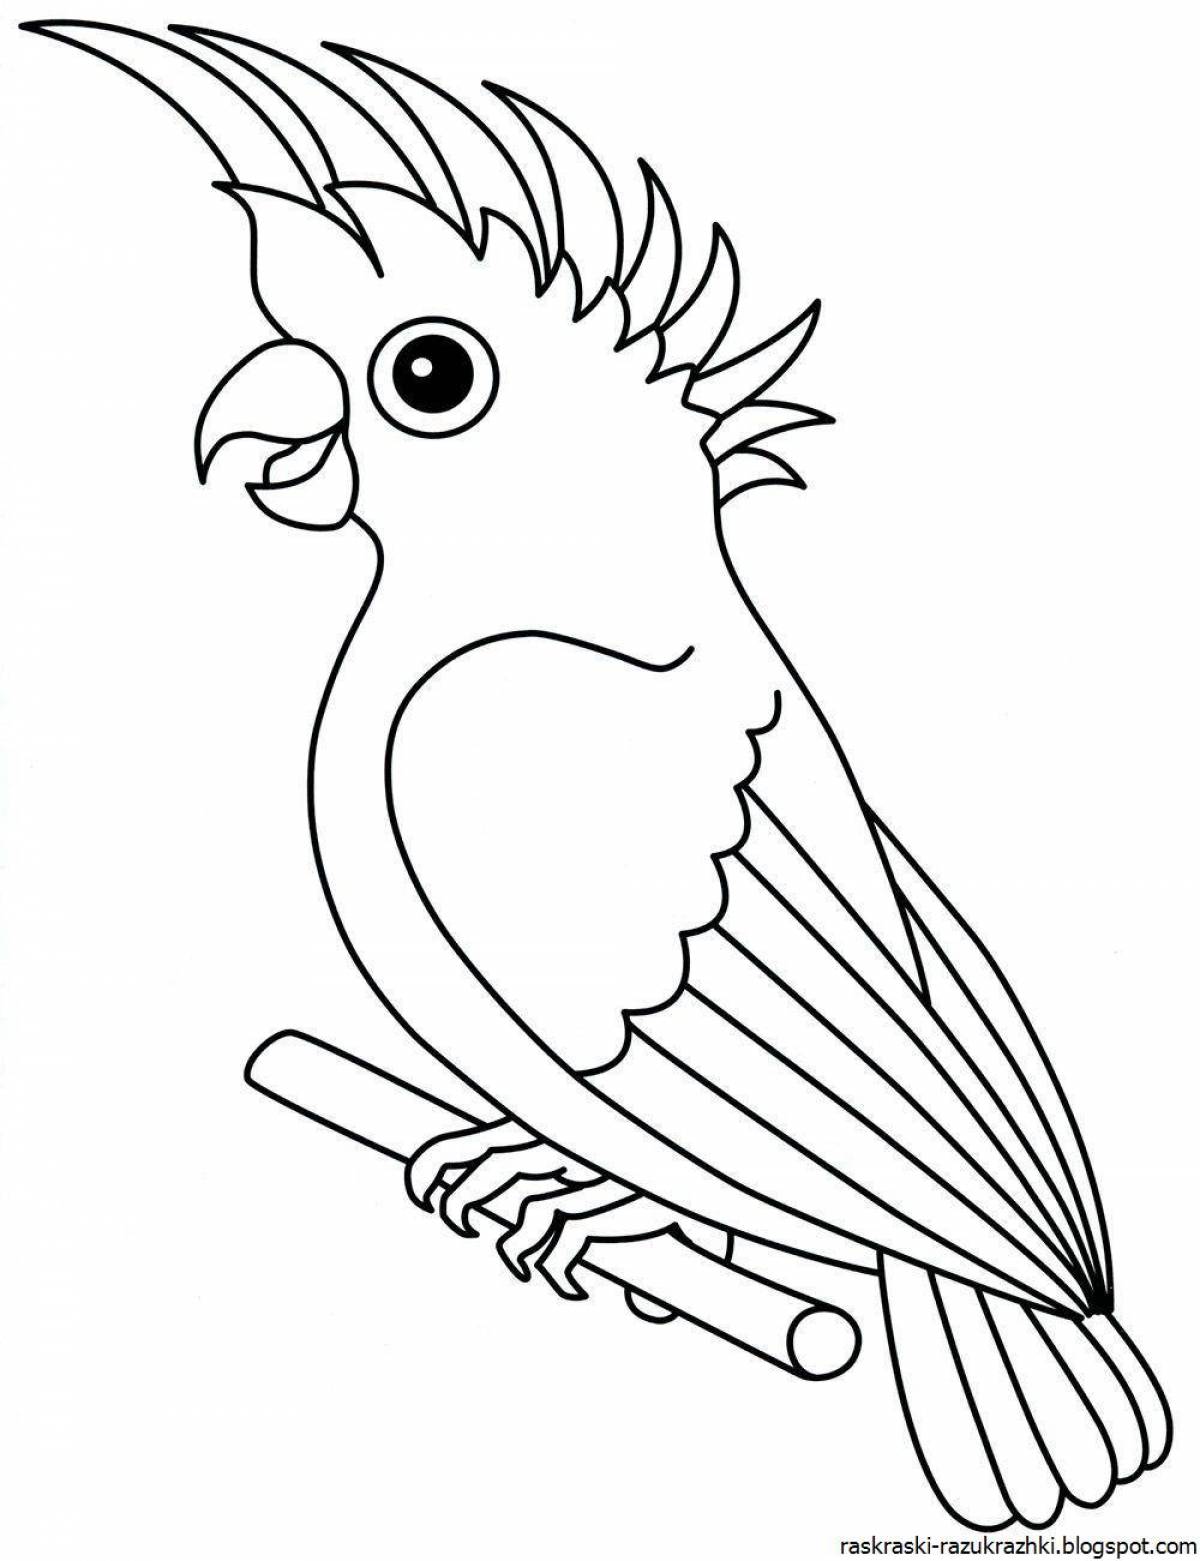 Peaceful bird coloring pages for kids